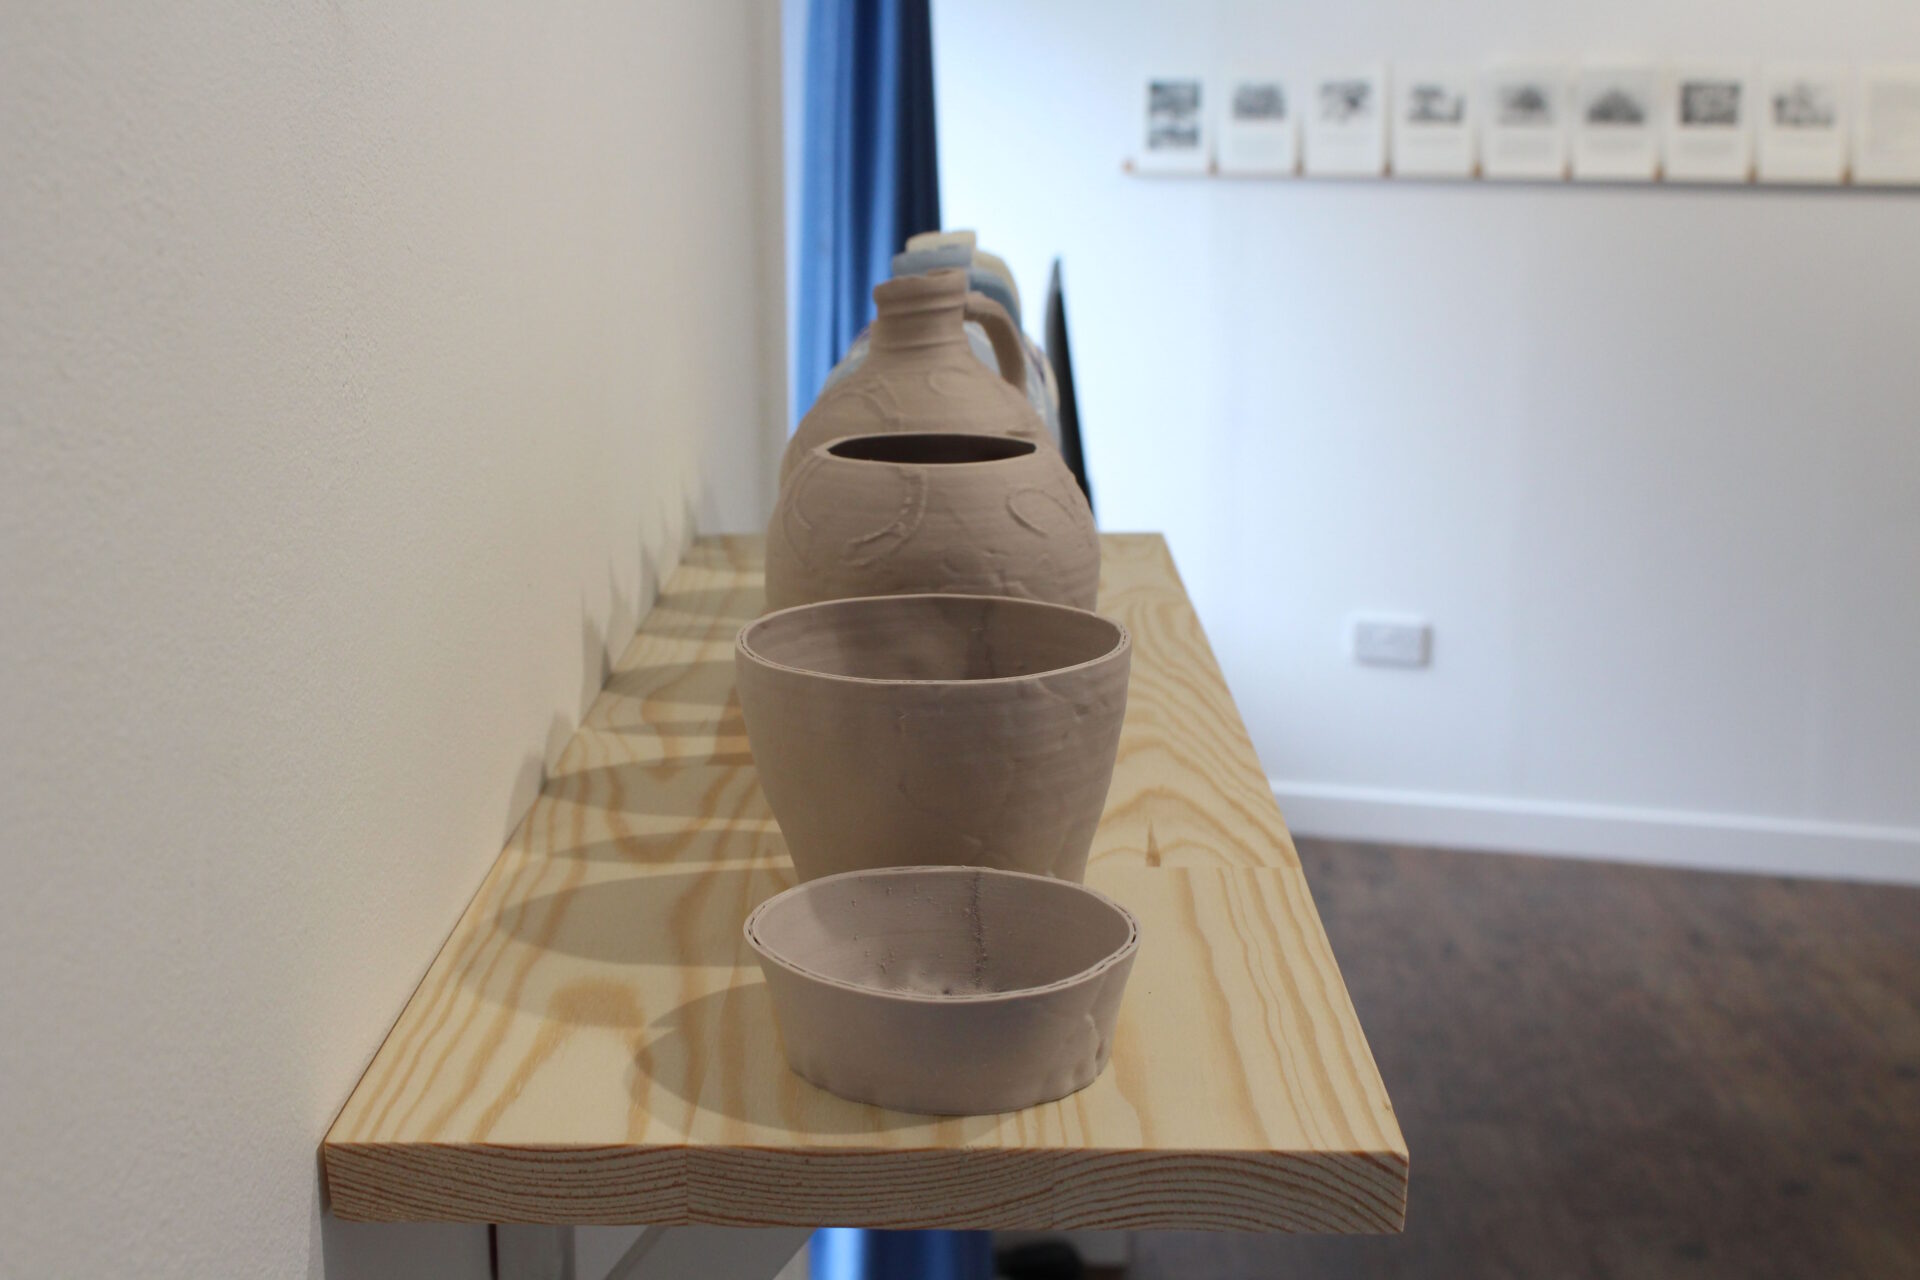 A series of grey clay 3D printed jugs in varying heights on a wooden shelf in a white gallery space.